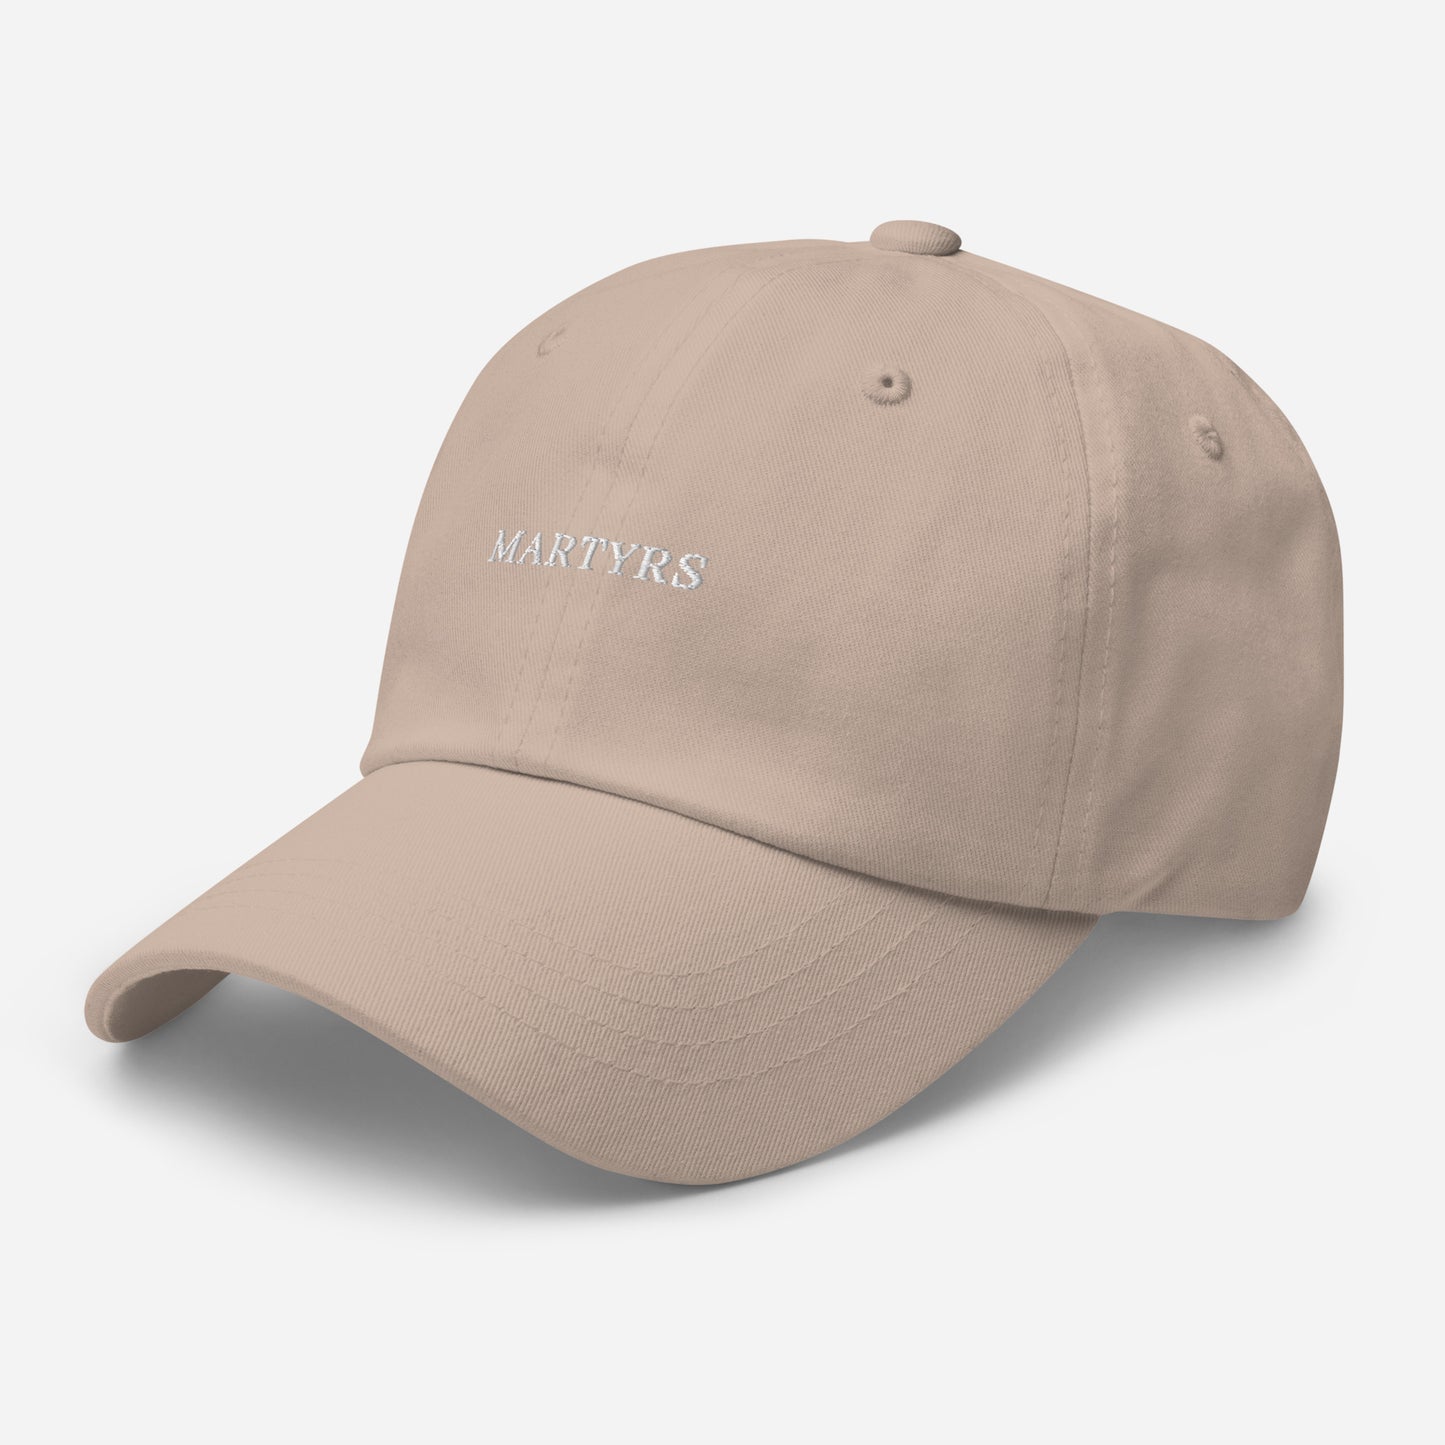 Martyrs - STONE Classic Dad hat - WHITE FONT broderie